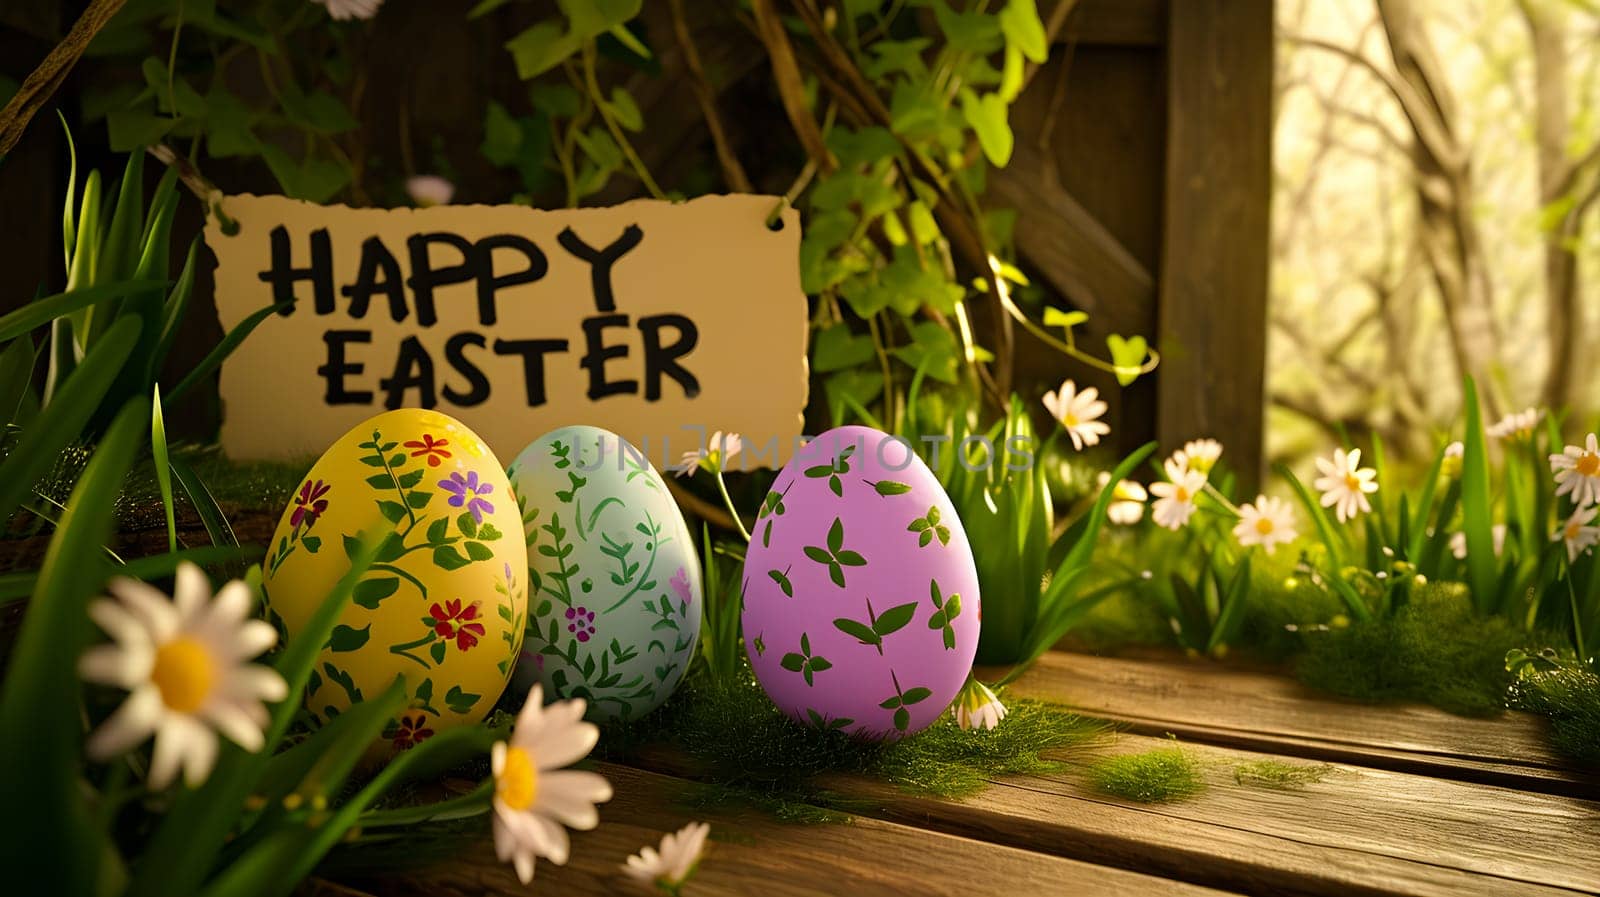 Easter eggs with vivid floral patterns beside a 'Happy Easter' sign amid daisies on a sunlit wooden surface by chrisroll